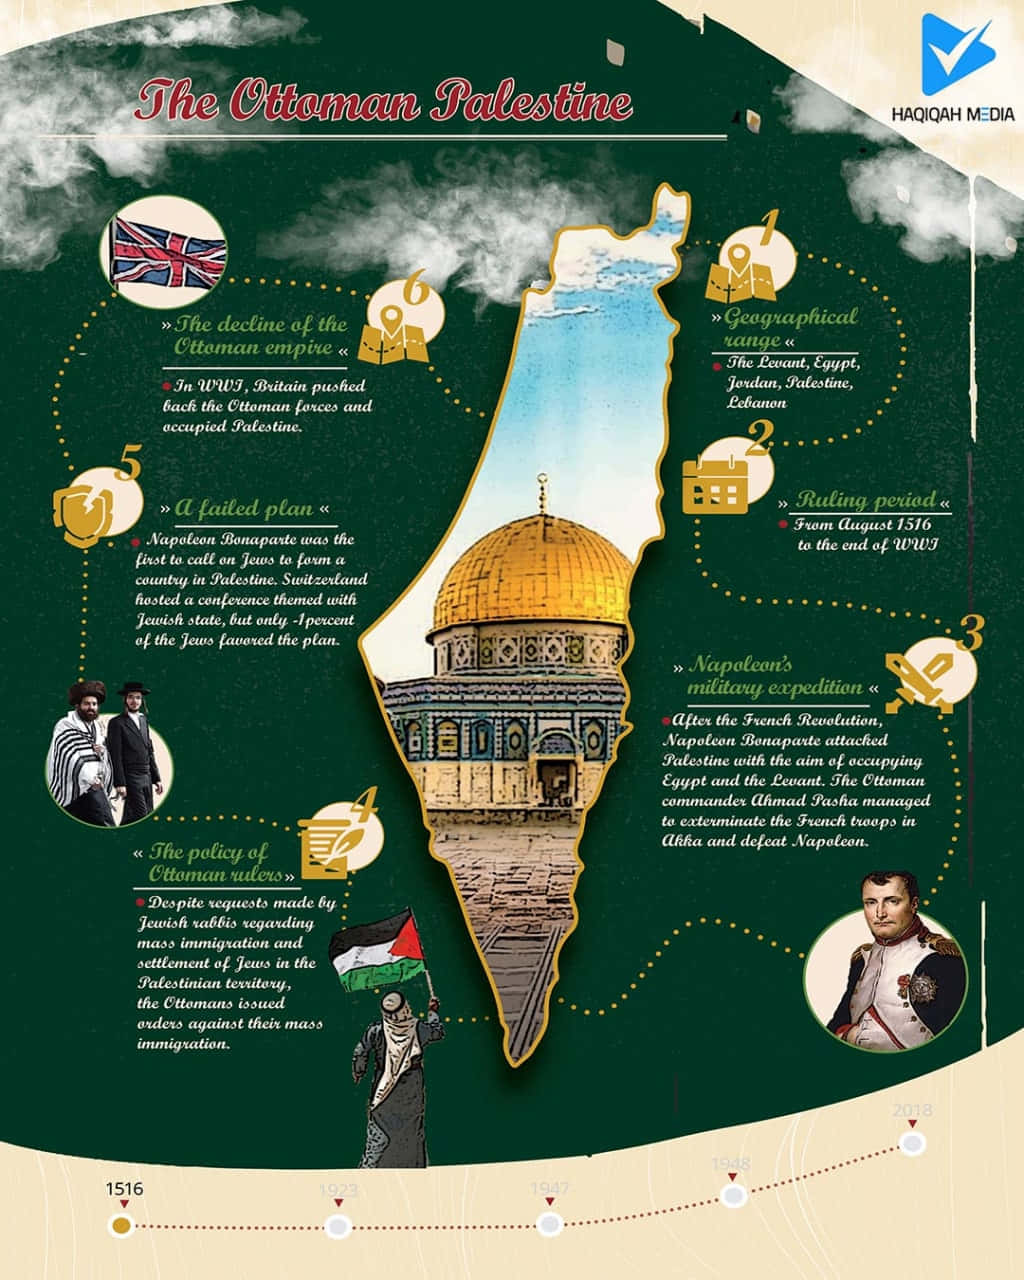 The Israeli Occupation Infographic